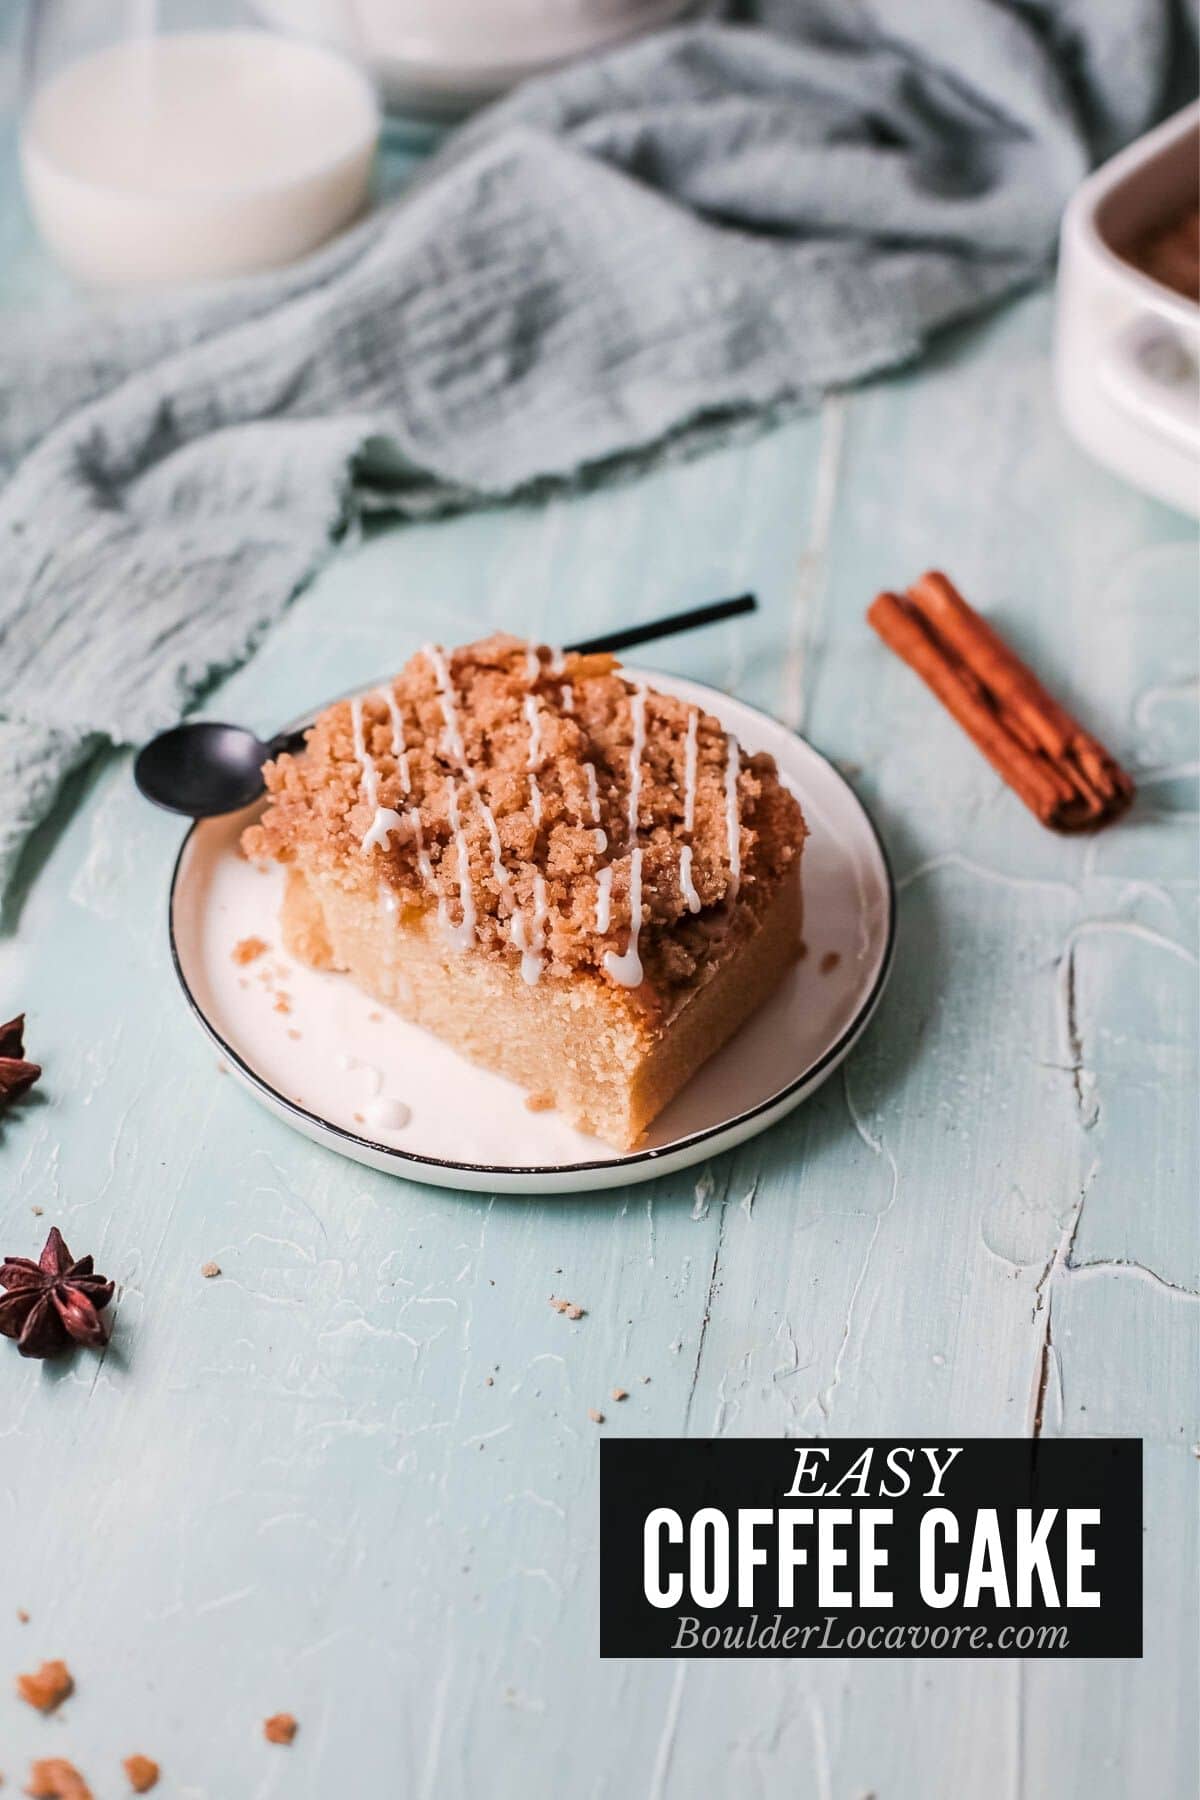 EASY COFFEE CAKE TITLE